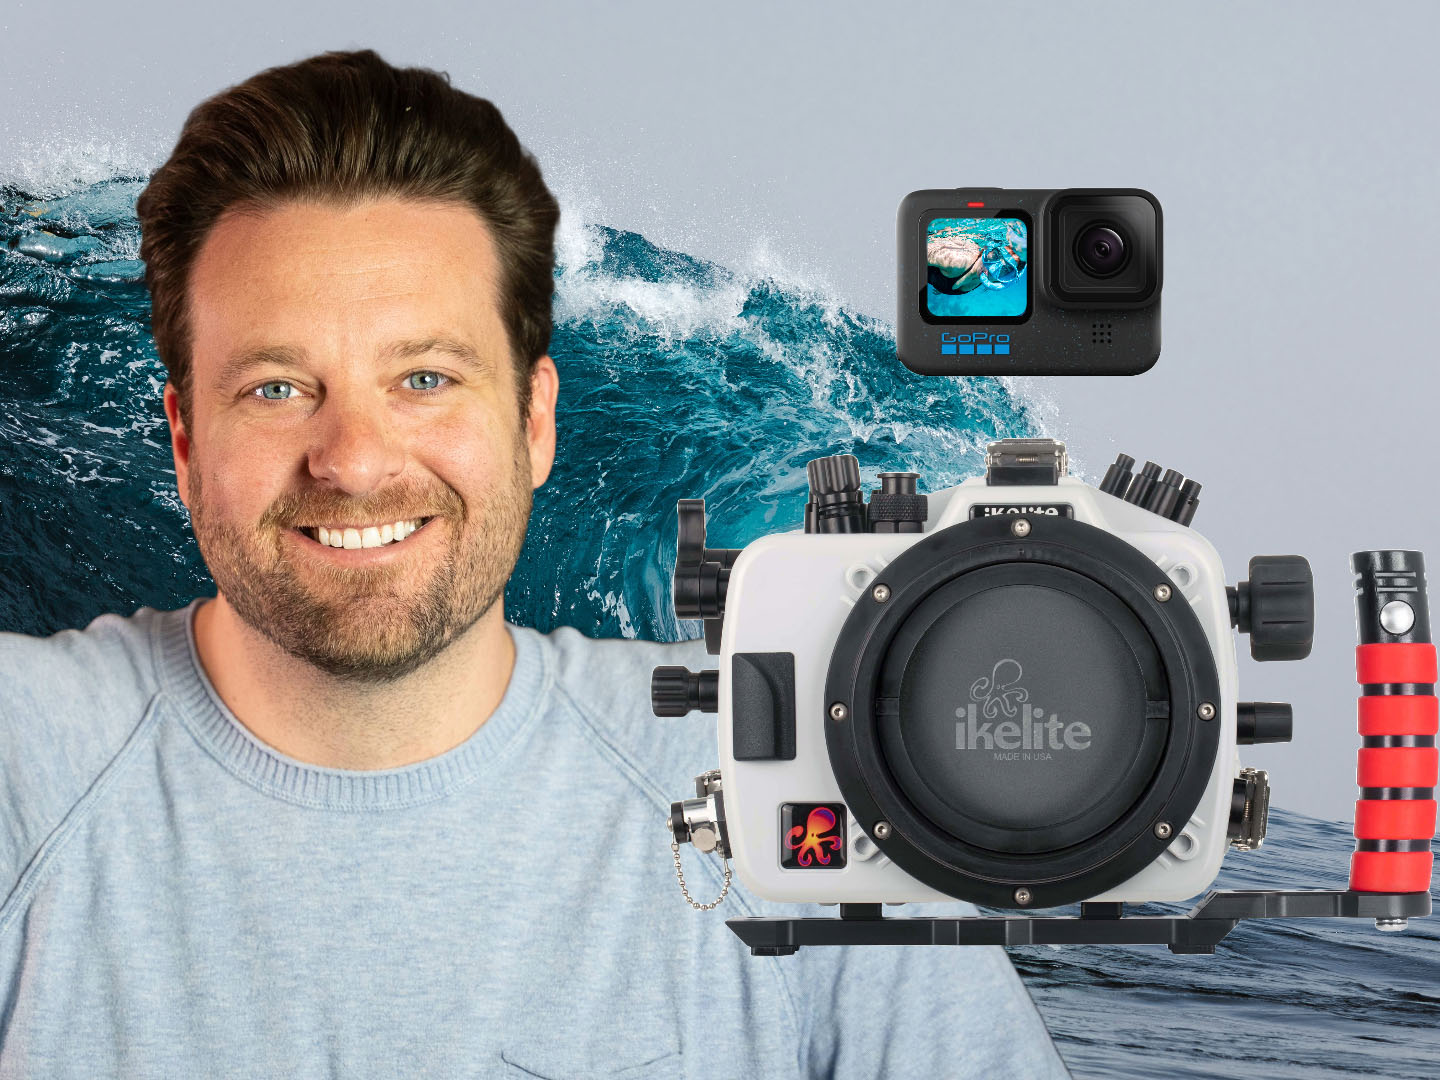 Adding a GoPro to Your Ikelite Underwater Housing [VIDEO]